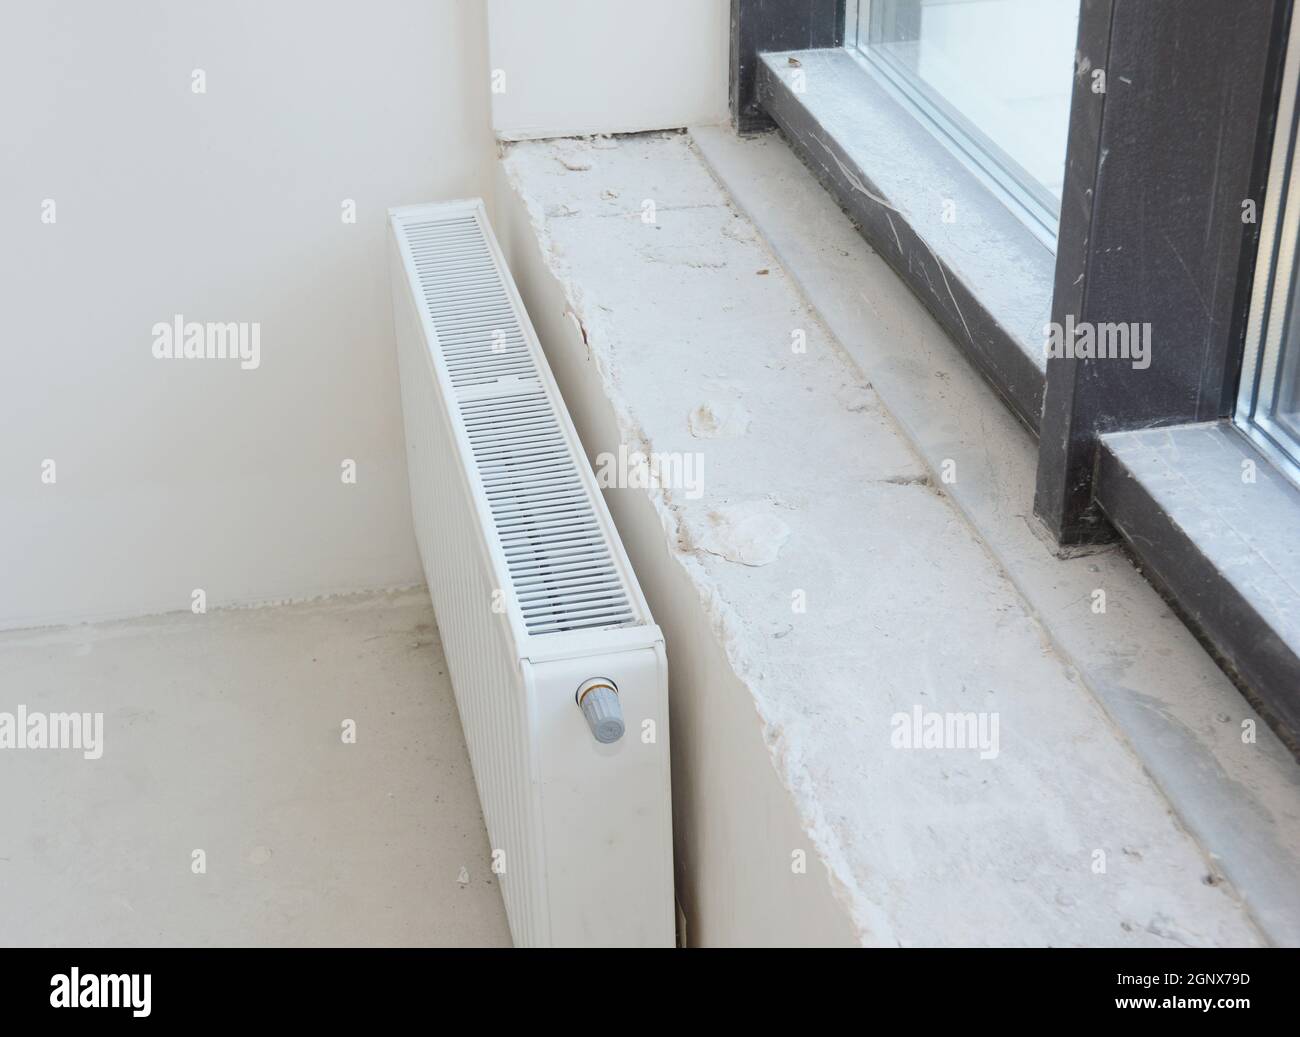 Installing metal white radiator heating with thermostat in new house construction. Stock Photo